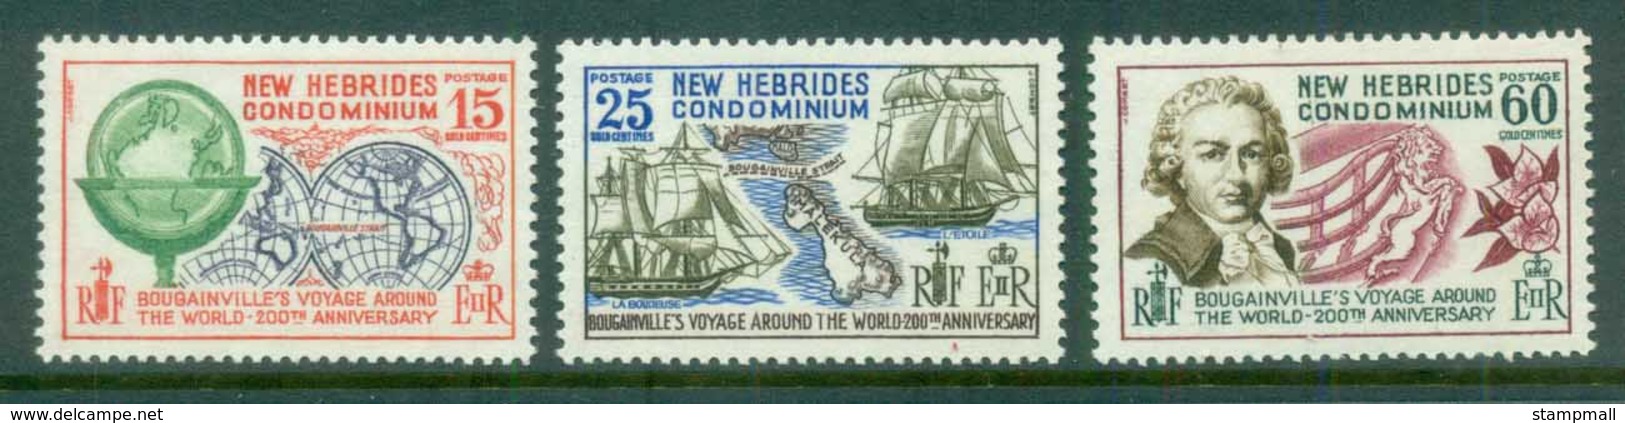 New Hebrides (Br) 1968 Bougainville MUH - Unused Stamps